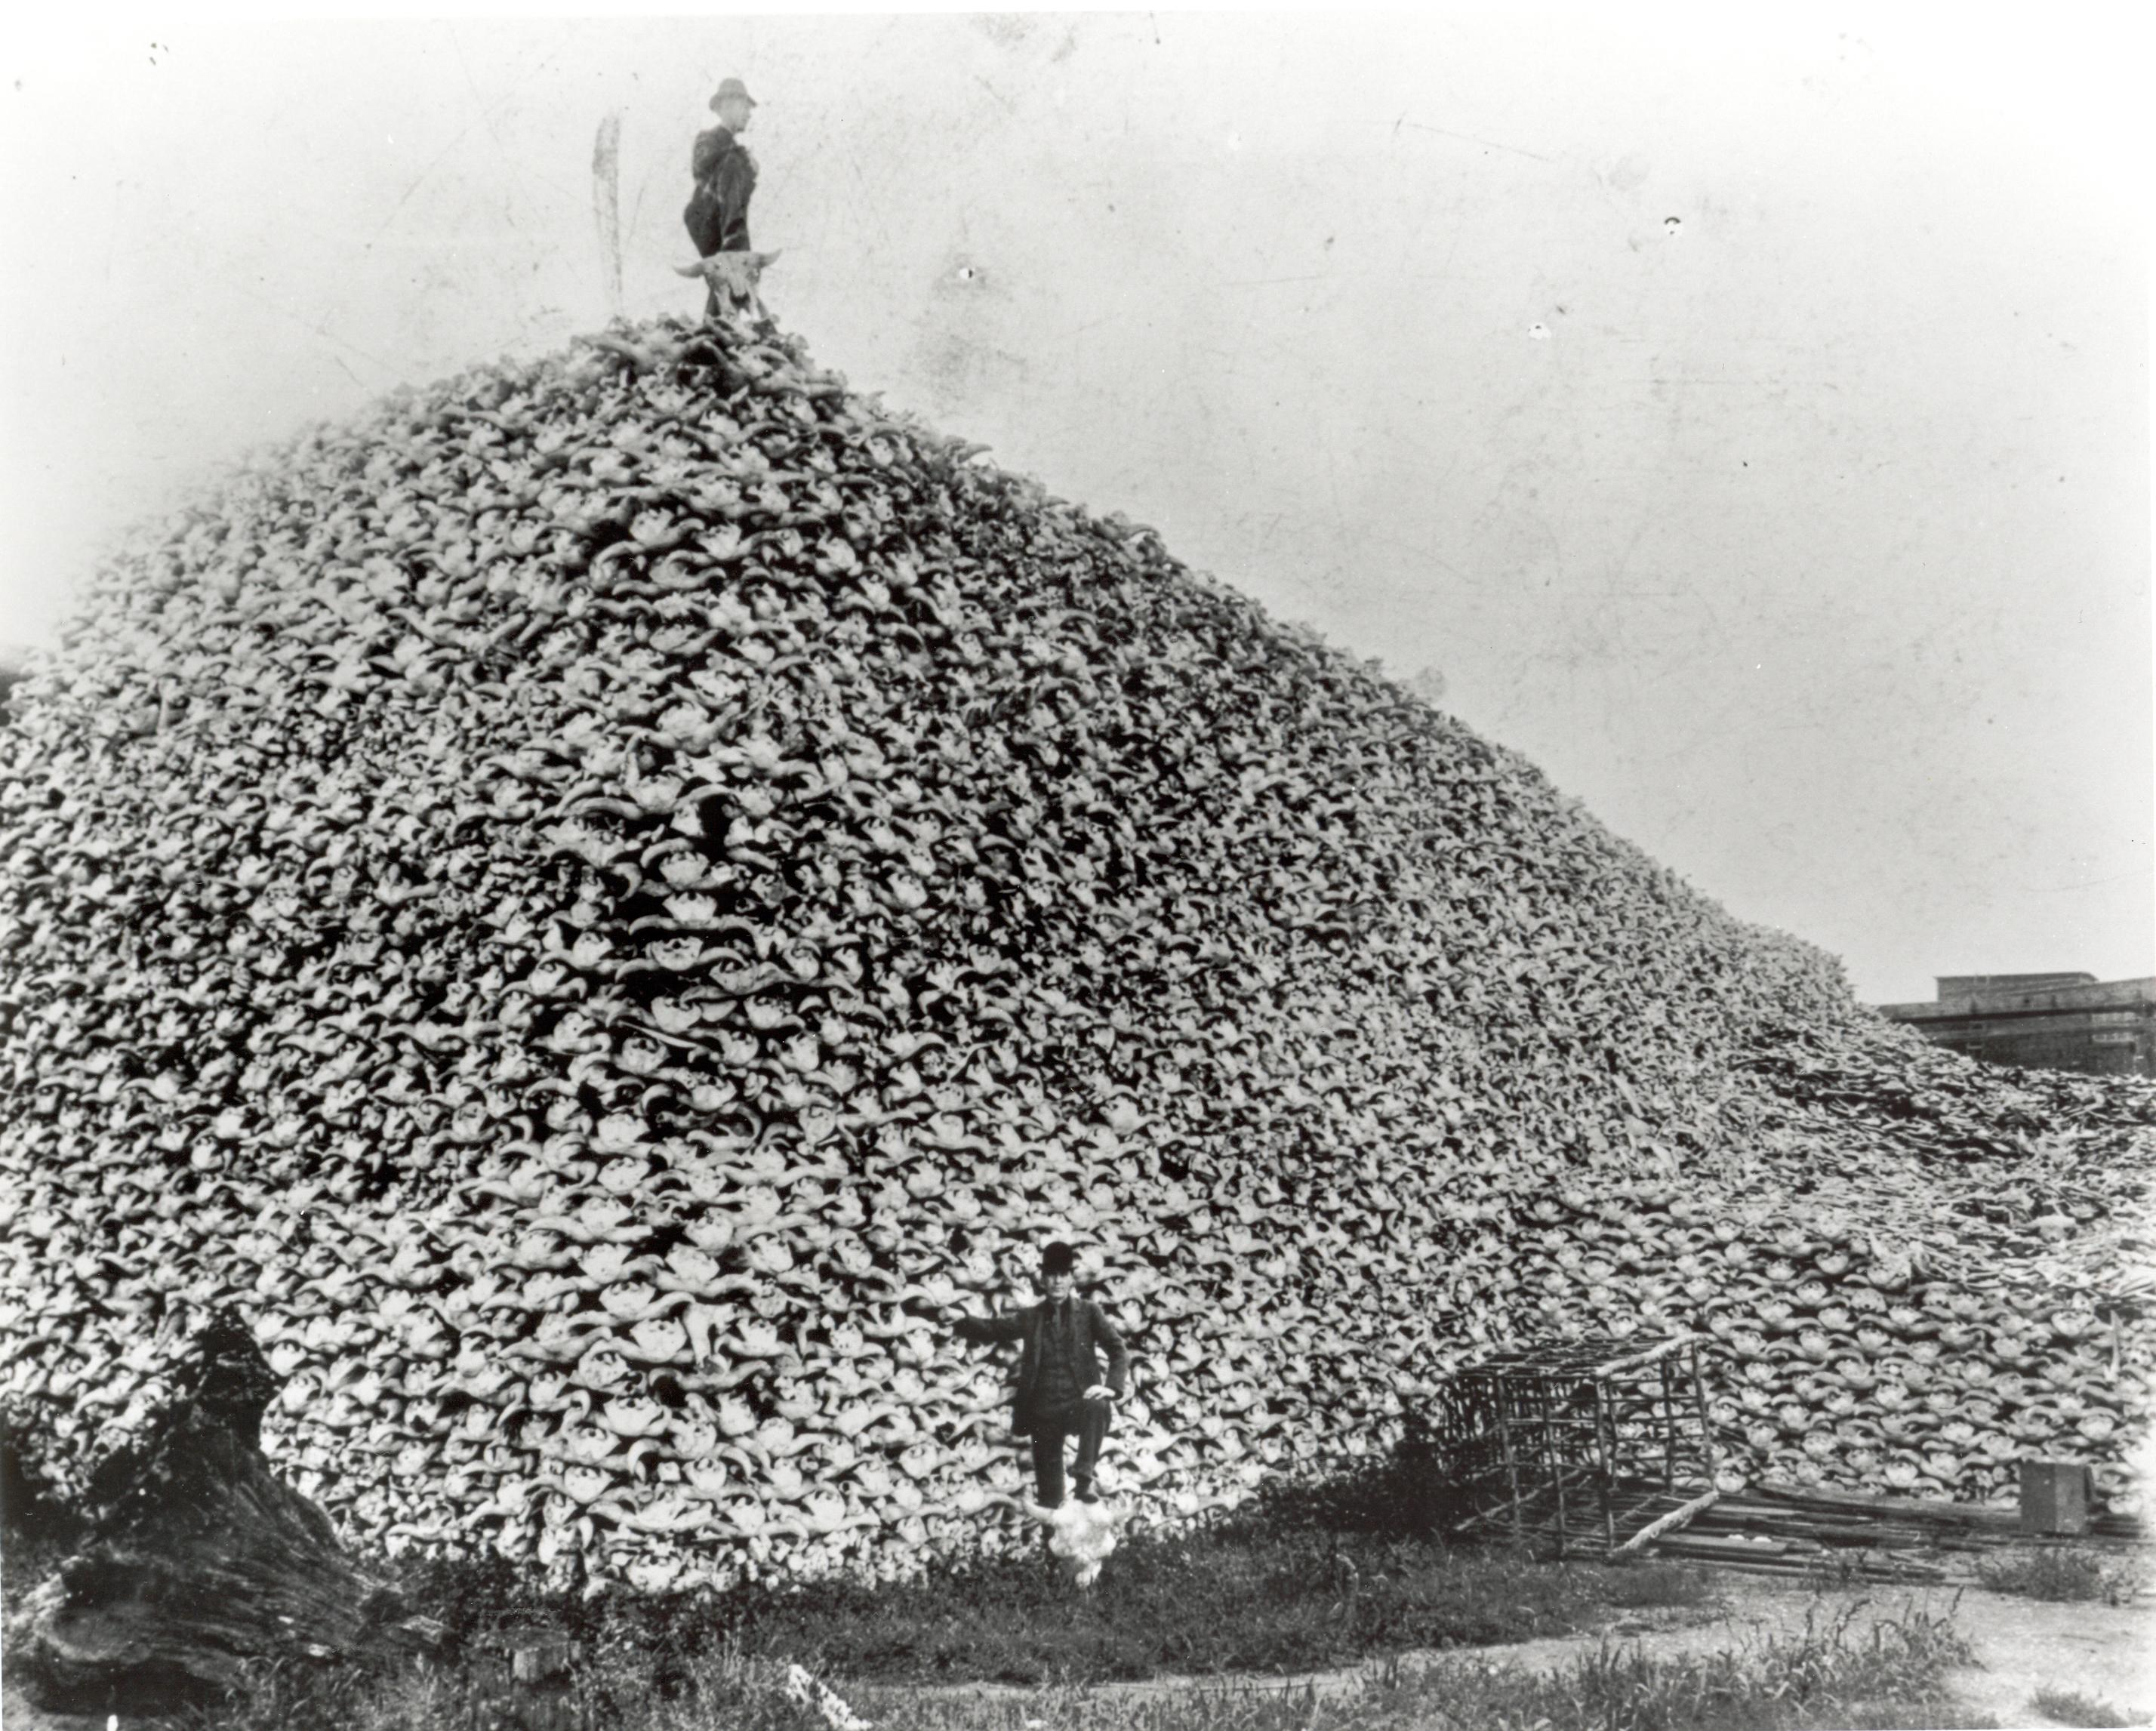 Undated photo of a man standing on top of an enormous pile of buffalo skulls. (Photo: Picture History/Newscom)